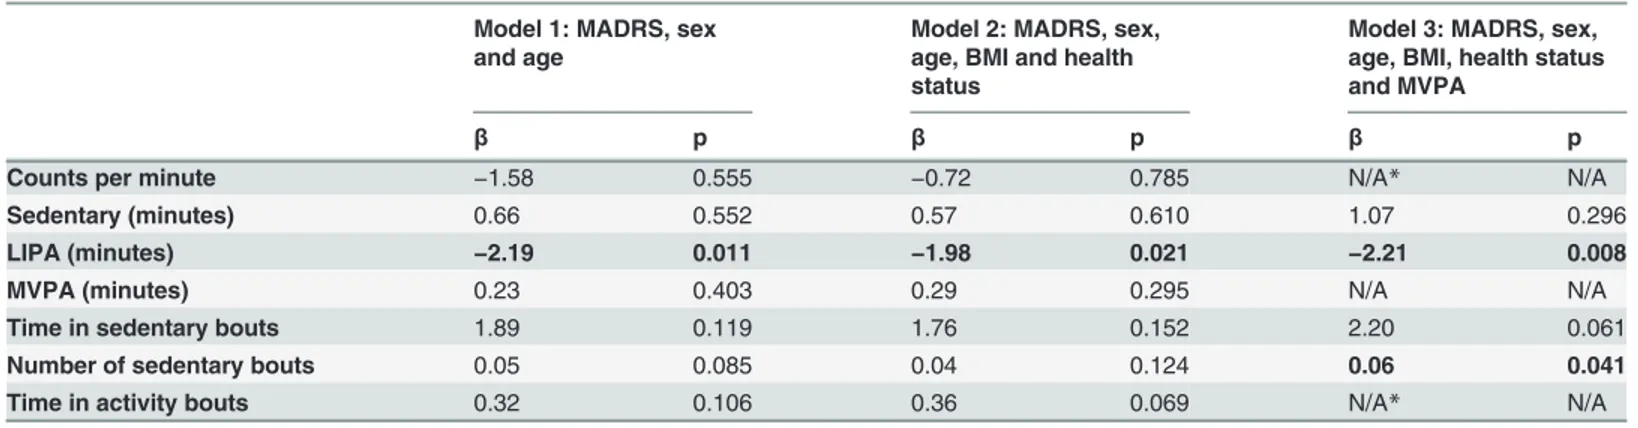 Table 3. The association between MADRS (independent) and each physical activity variable (dependent) as depicted by multiple linear regression models.